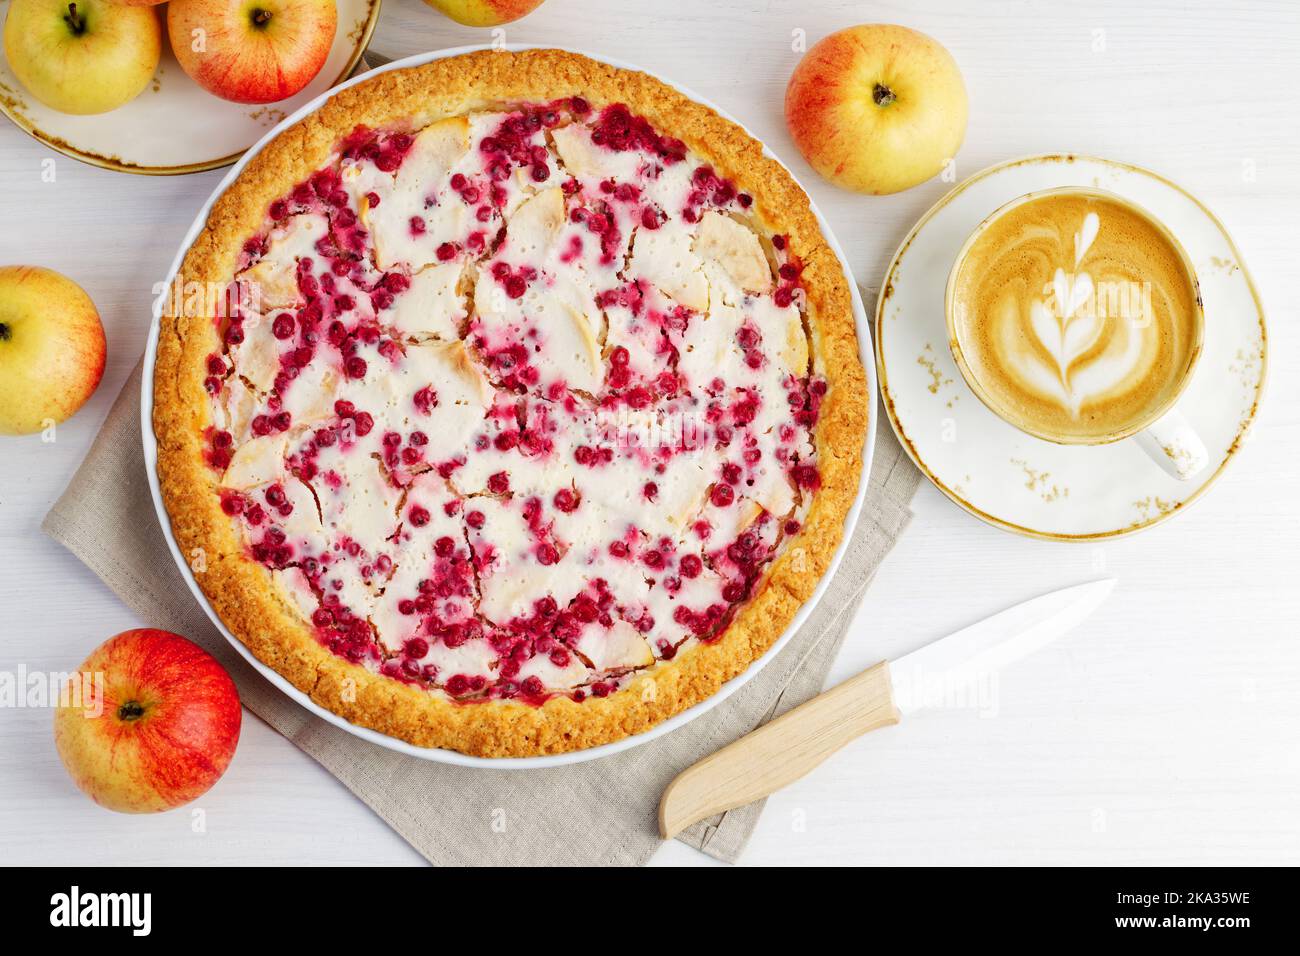 Homemade apple and redcurrant pie and cup of coffee cappuccino on white wooden table. Top view. Stock Photo